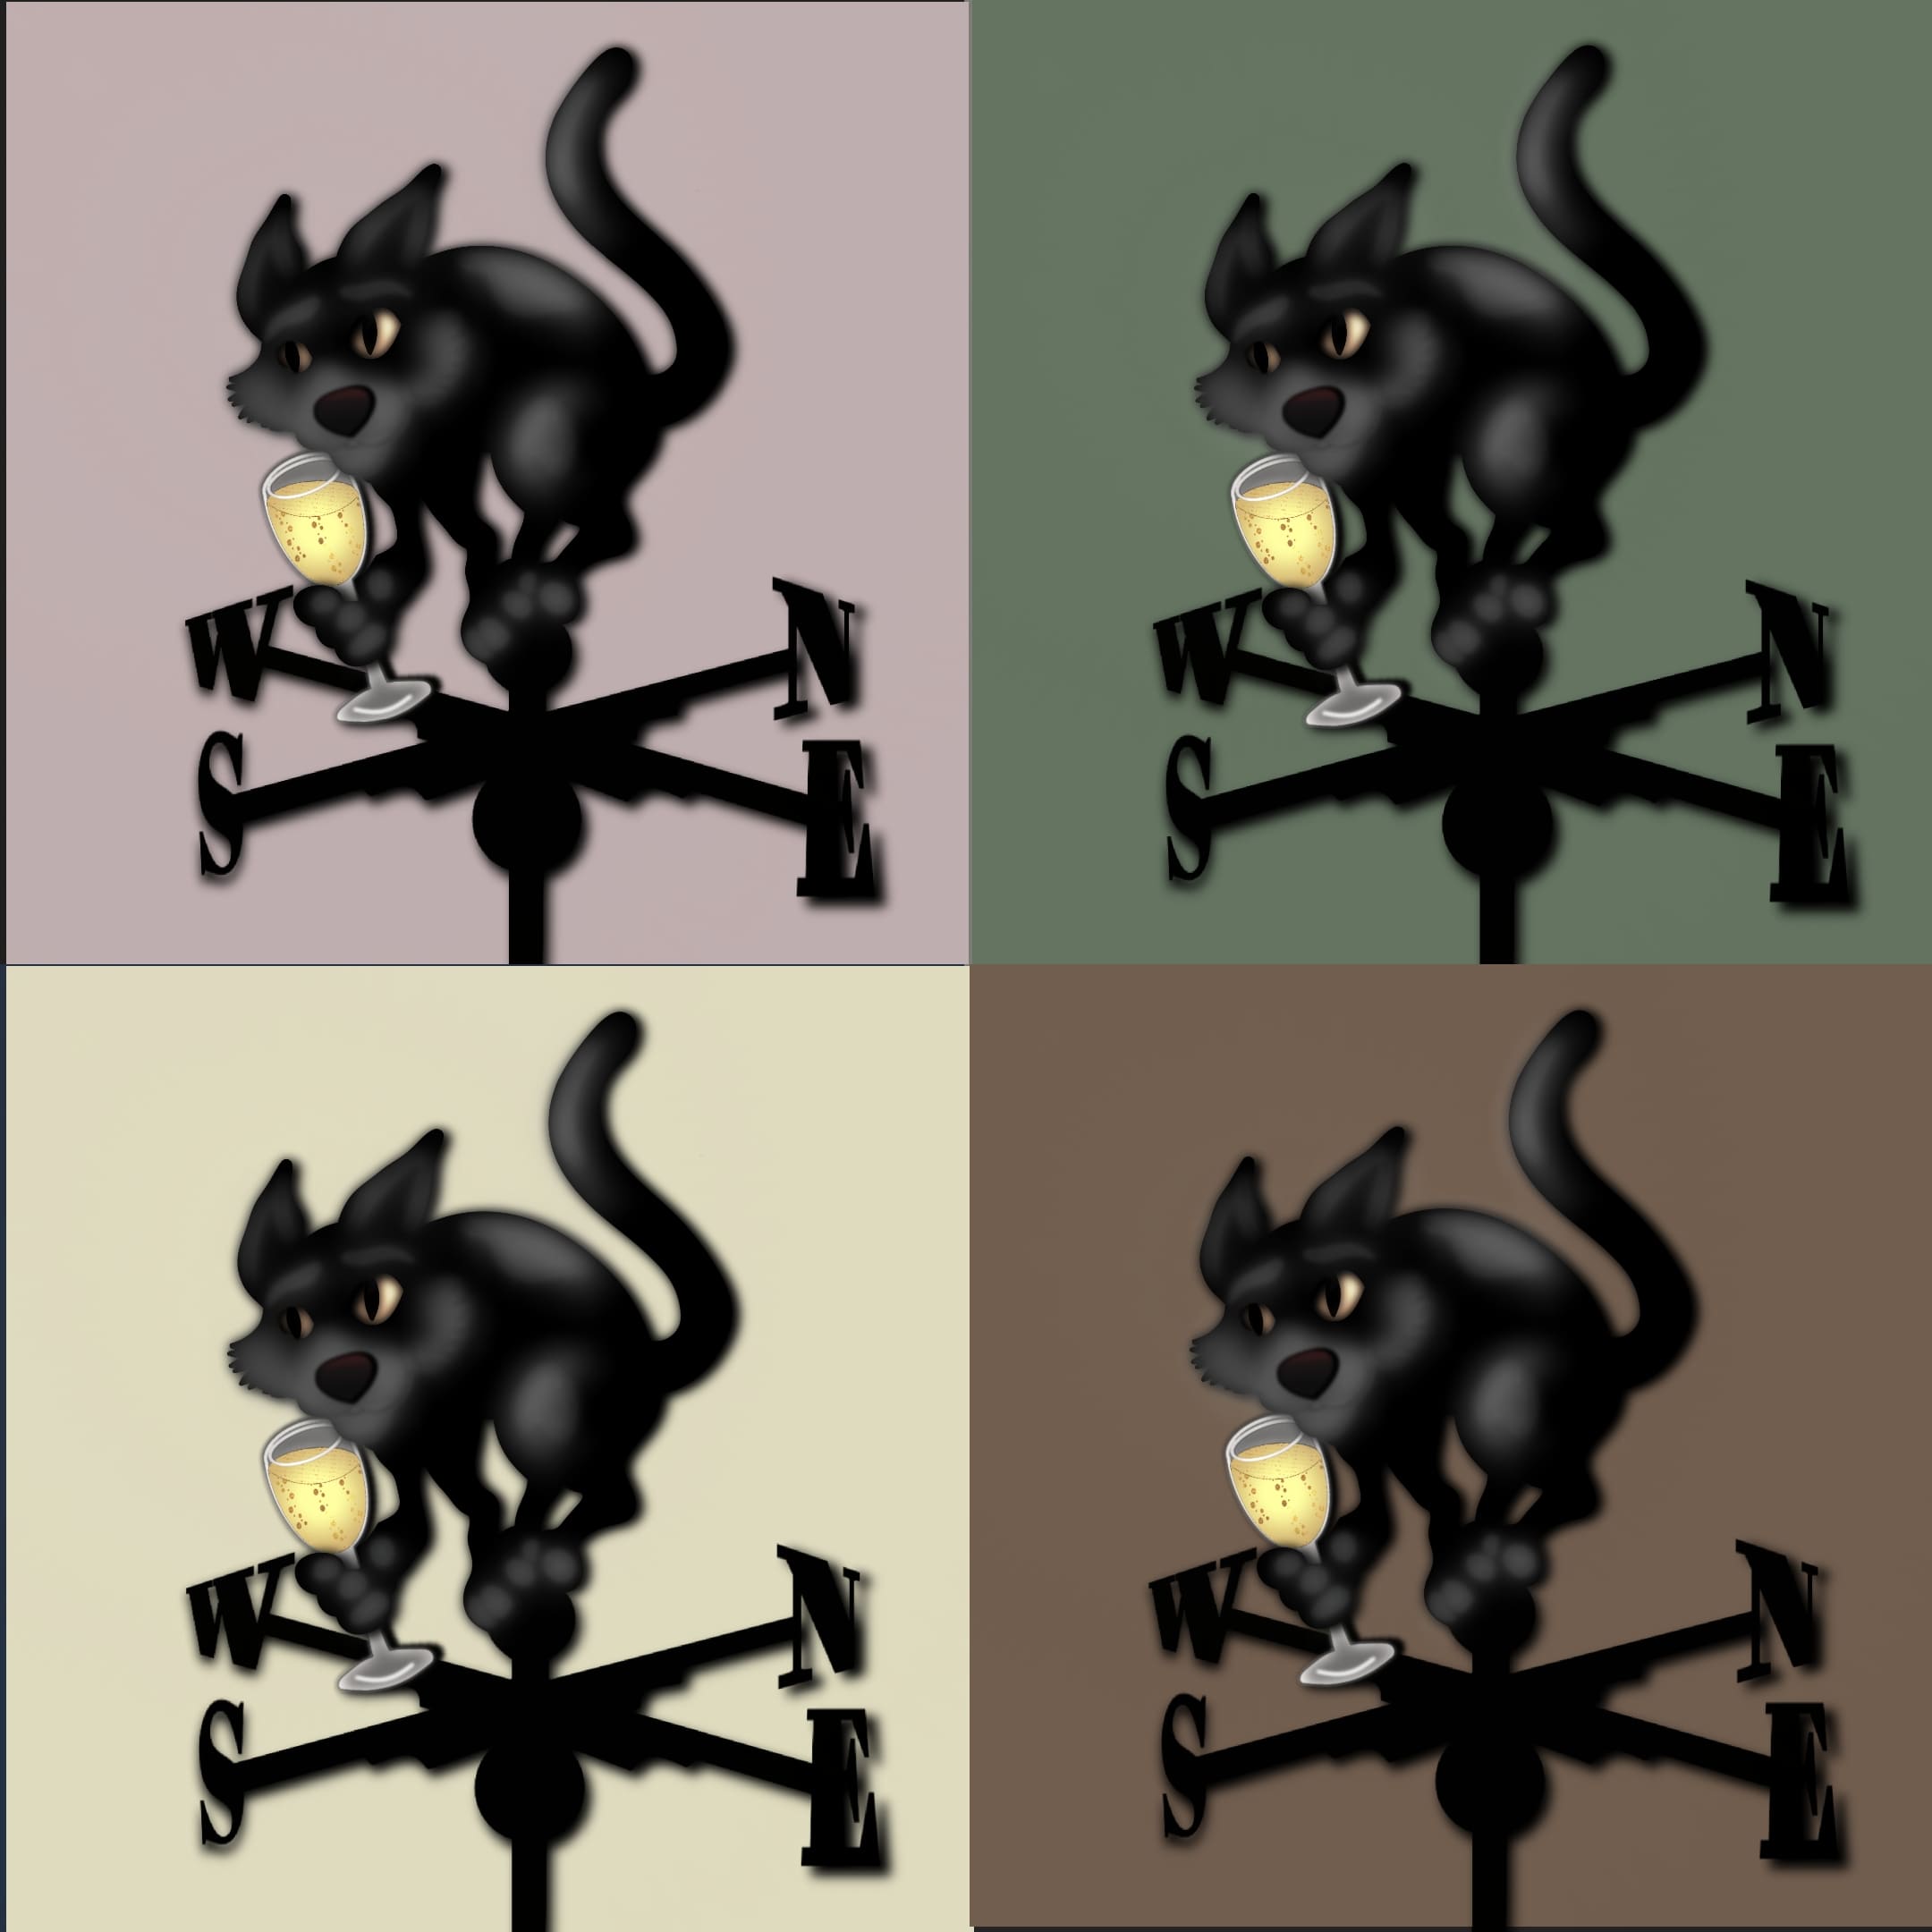 Four options of wolf illustrations.